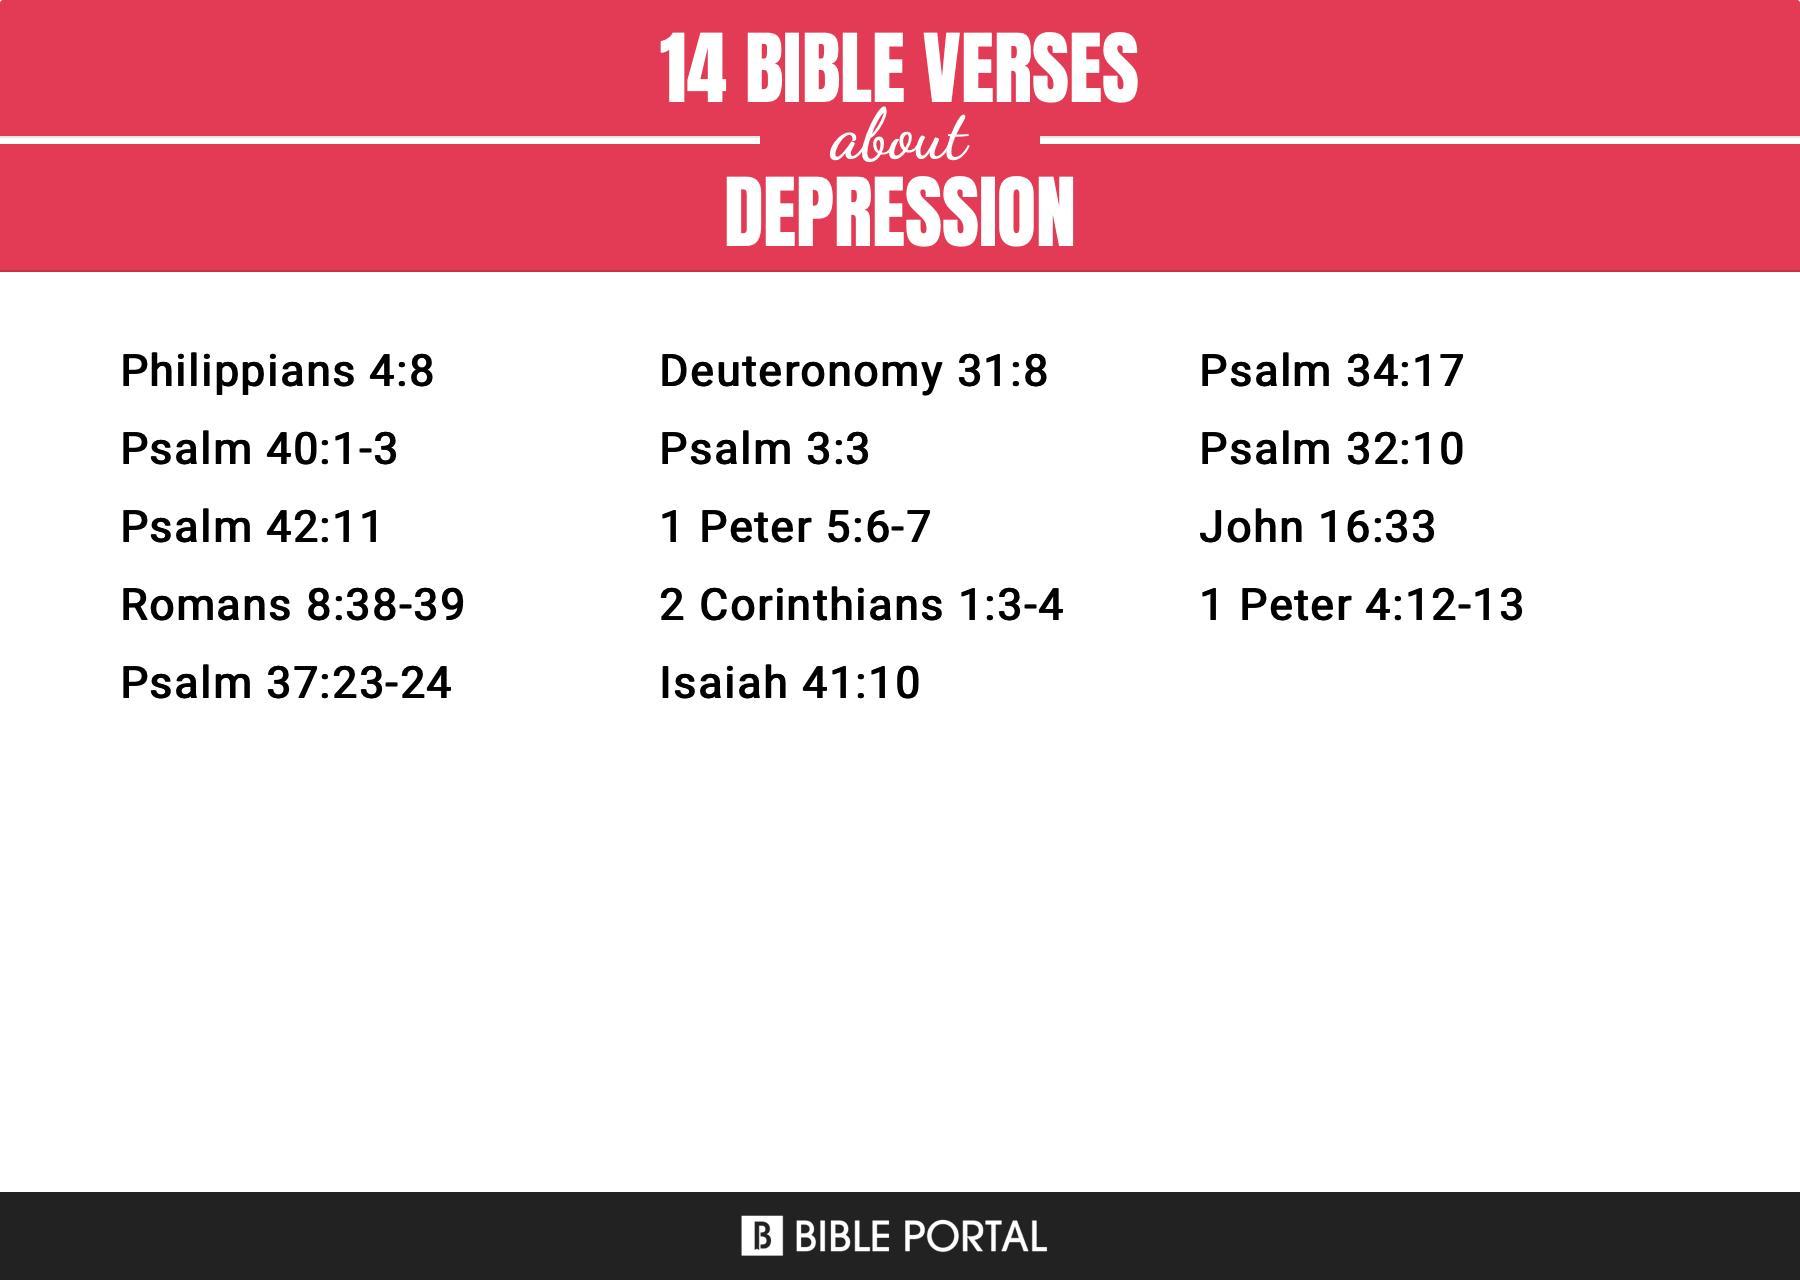 What Does the Bible Say about Depression?